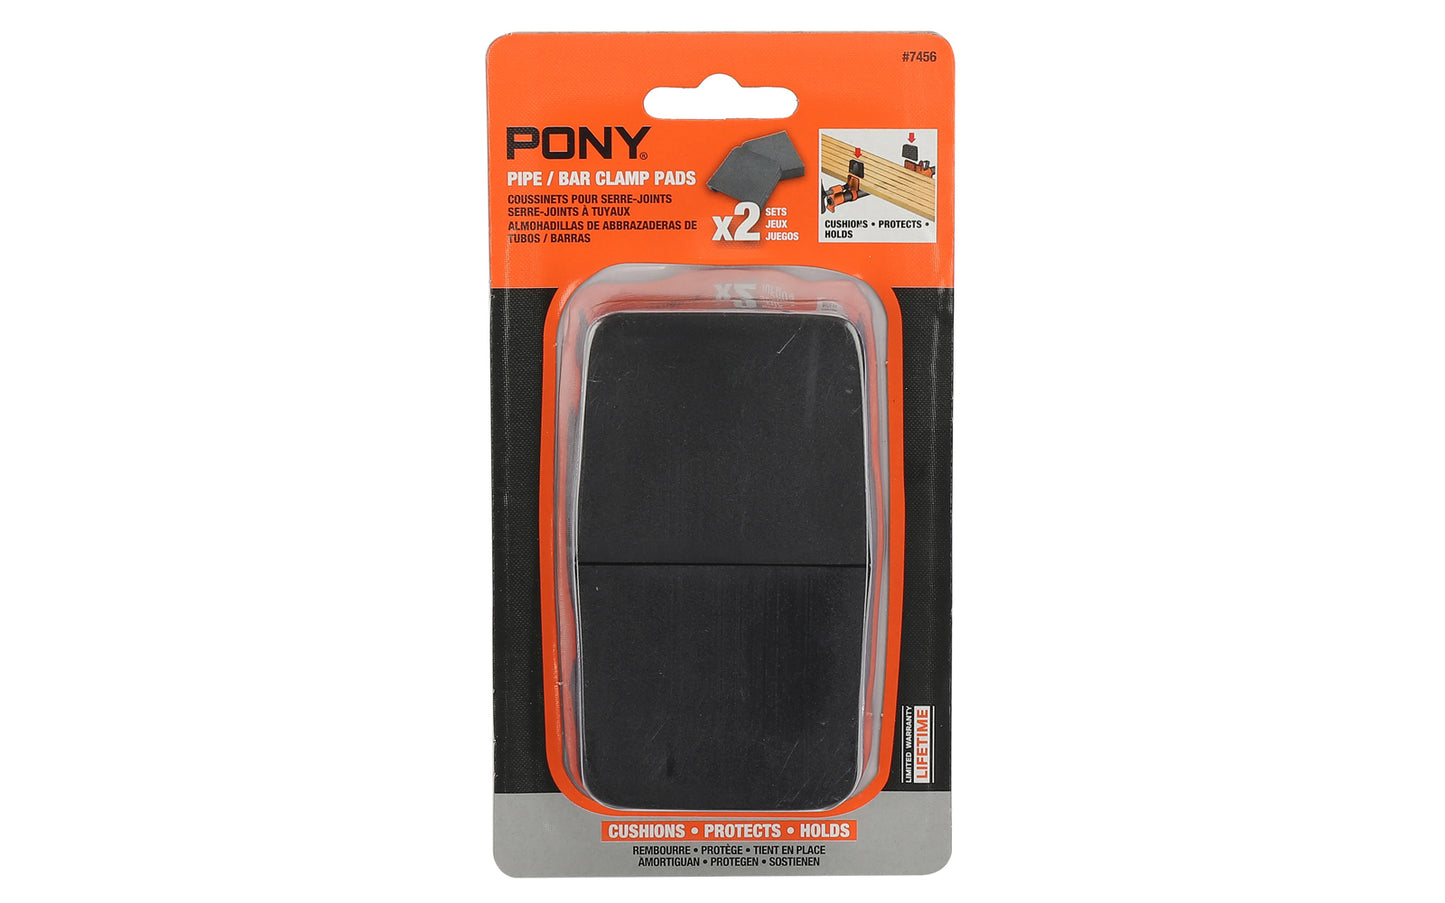 Pony Pipe / Bar Clamp Pads - Pony / Jorgensen Model No. 7456 - Cushions, holds, & protects - Non-marring, non-sticking, non-slipping durable plastic pads